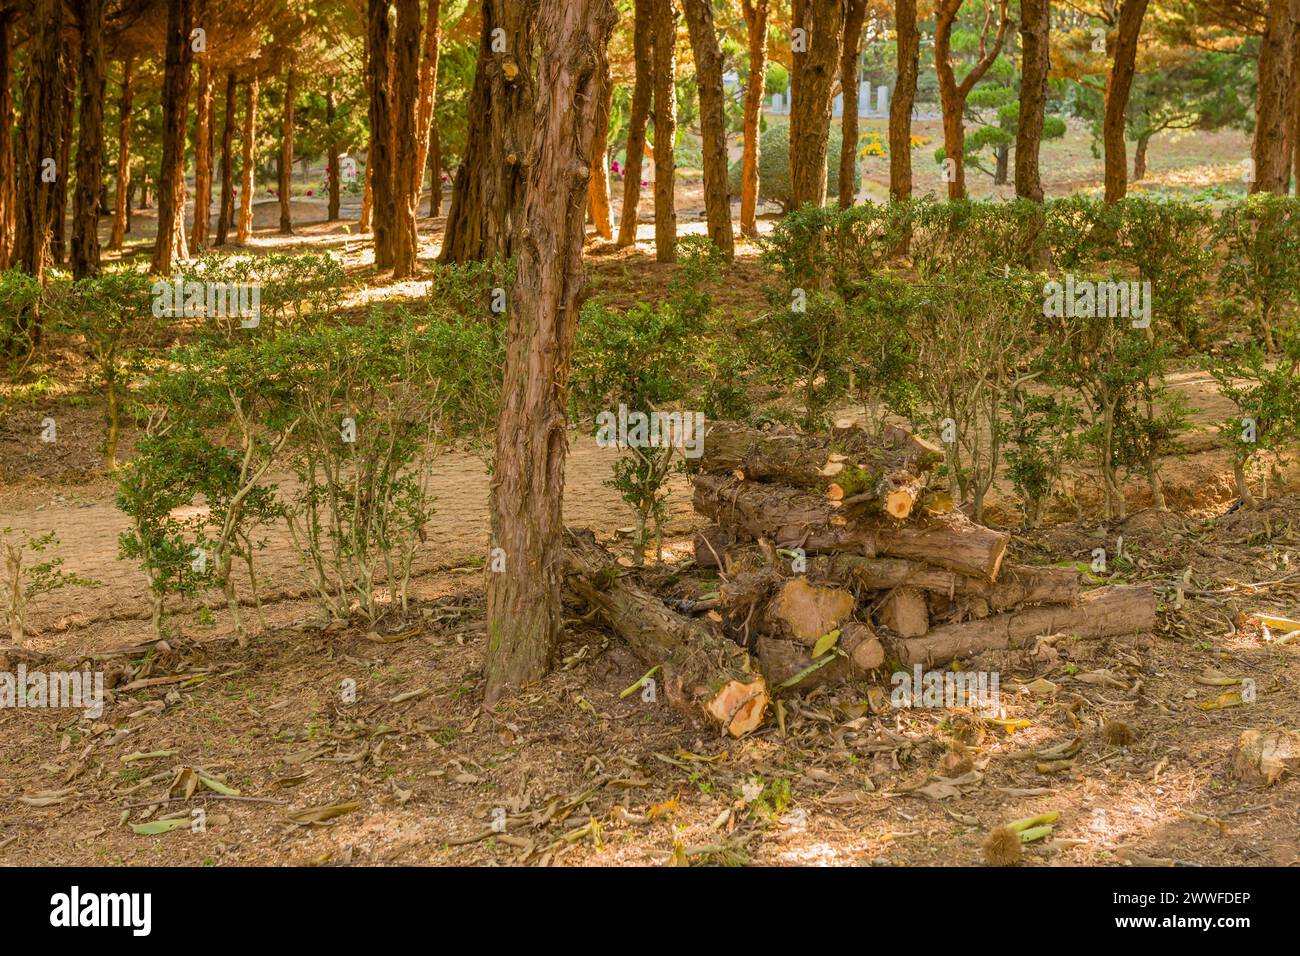 A small woodpile rests on the forest floor amidst green shrubs, in South Korea Stock Photo